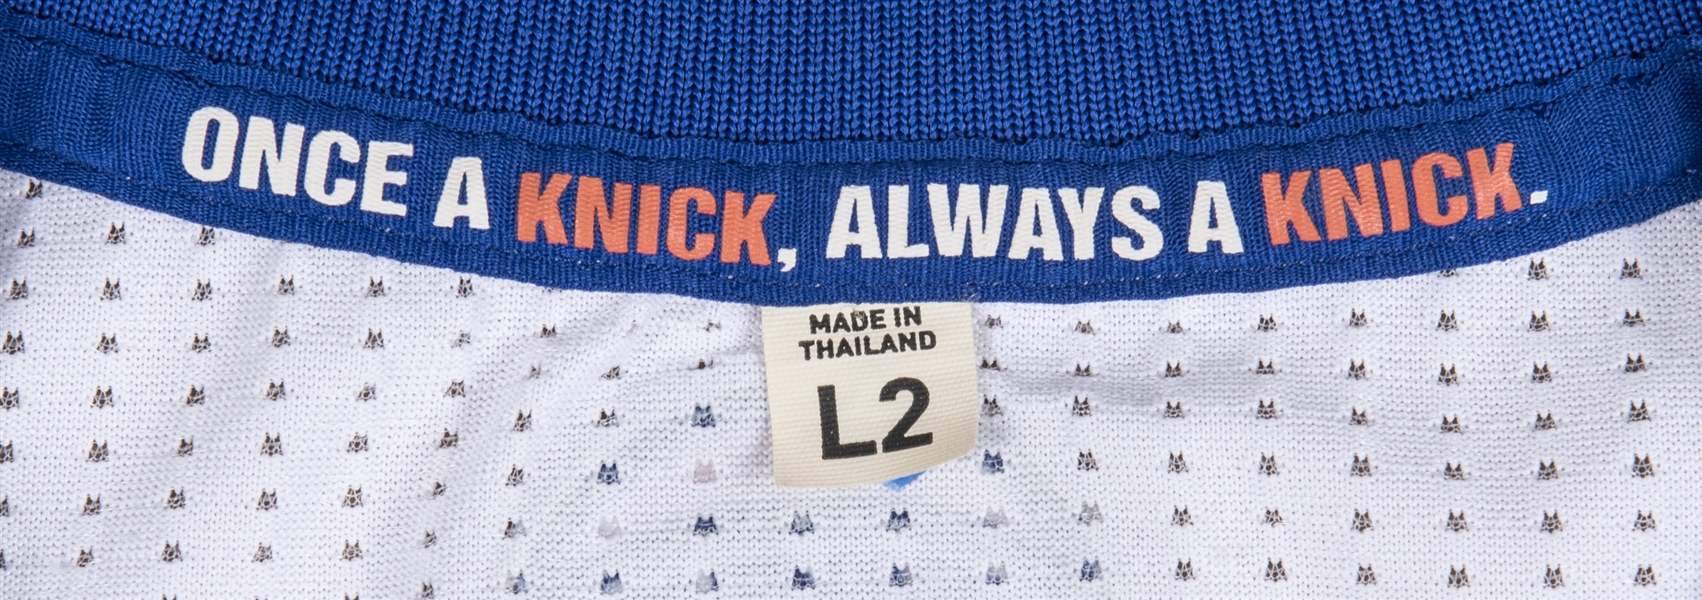 Lot Detail - 2012-13 Carmelo Anthony Game Used New York Knicks Home White  Uniform Worn on 12/13/2012 vs Kobe Bryant and Los Angeles Lakers - Jersey  and Shorts (Steiner)